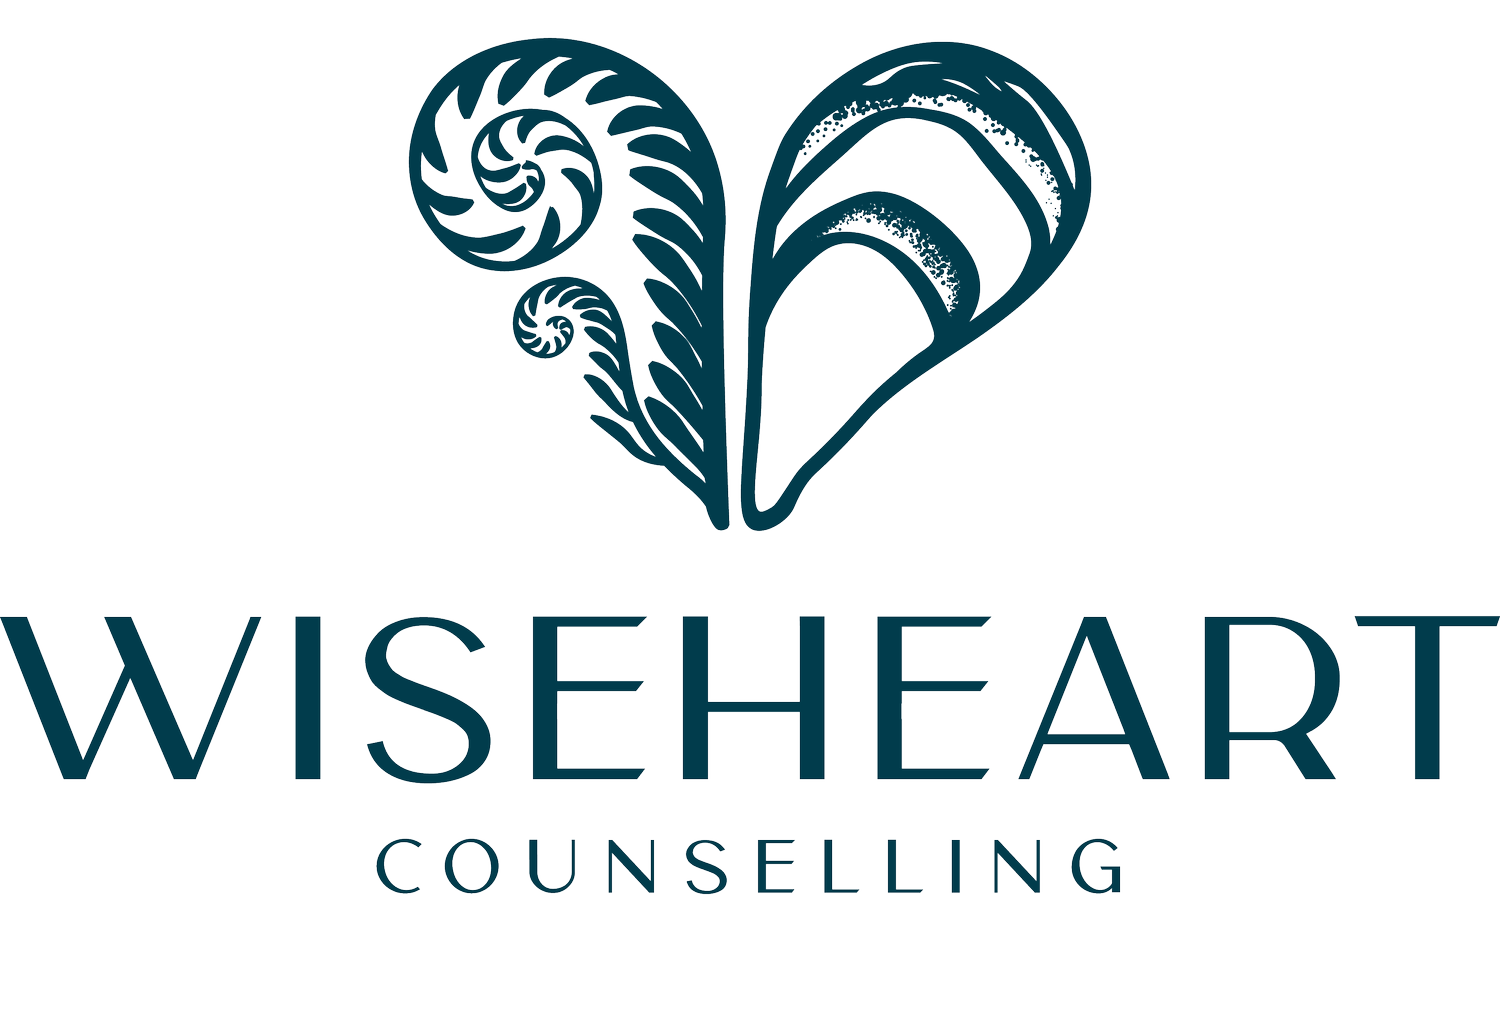 Wiseheart Counselling